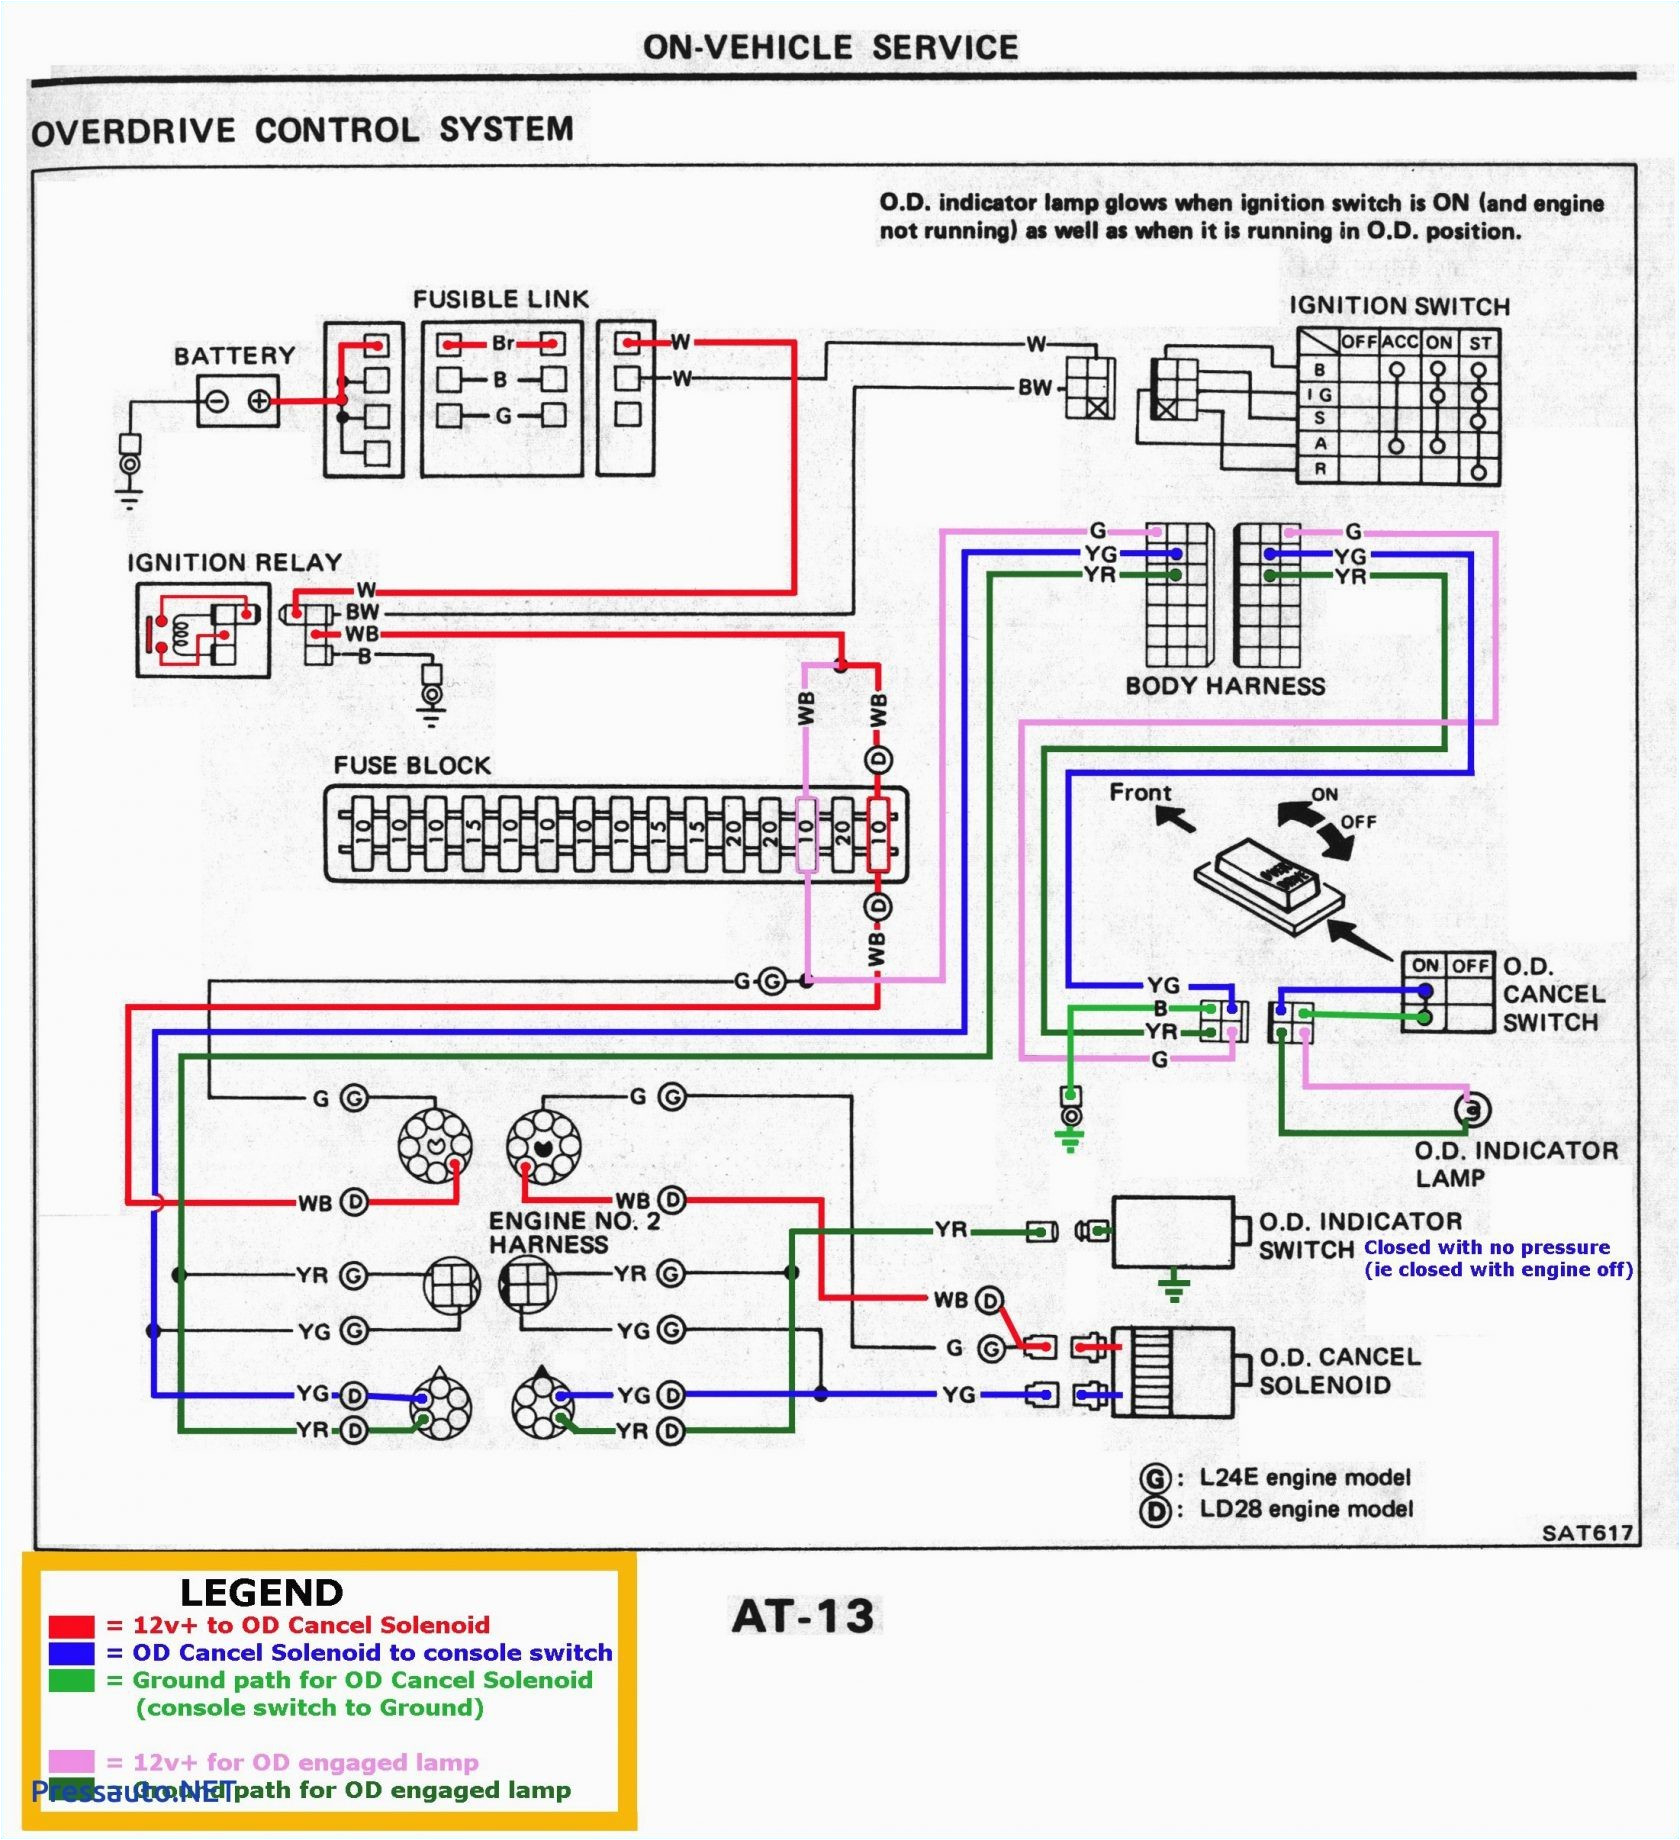 wiring diagram for 2005 nissan altima get free image about wiring 2004 nissan altima radio wiring diagram 2005 nissan altima radio wiring diagram